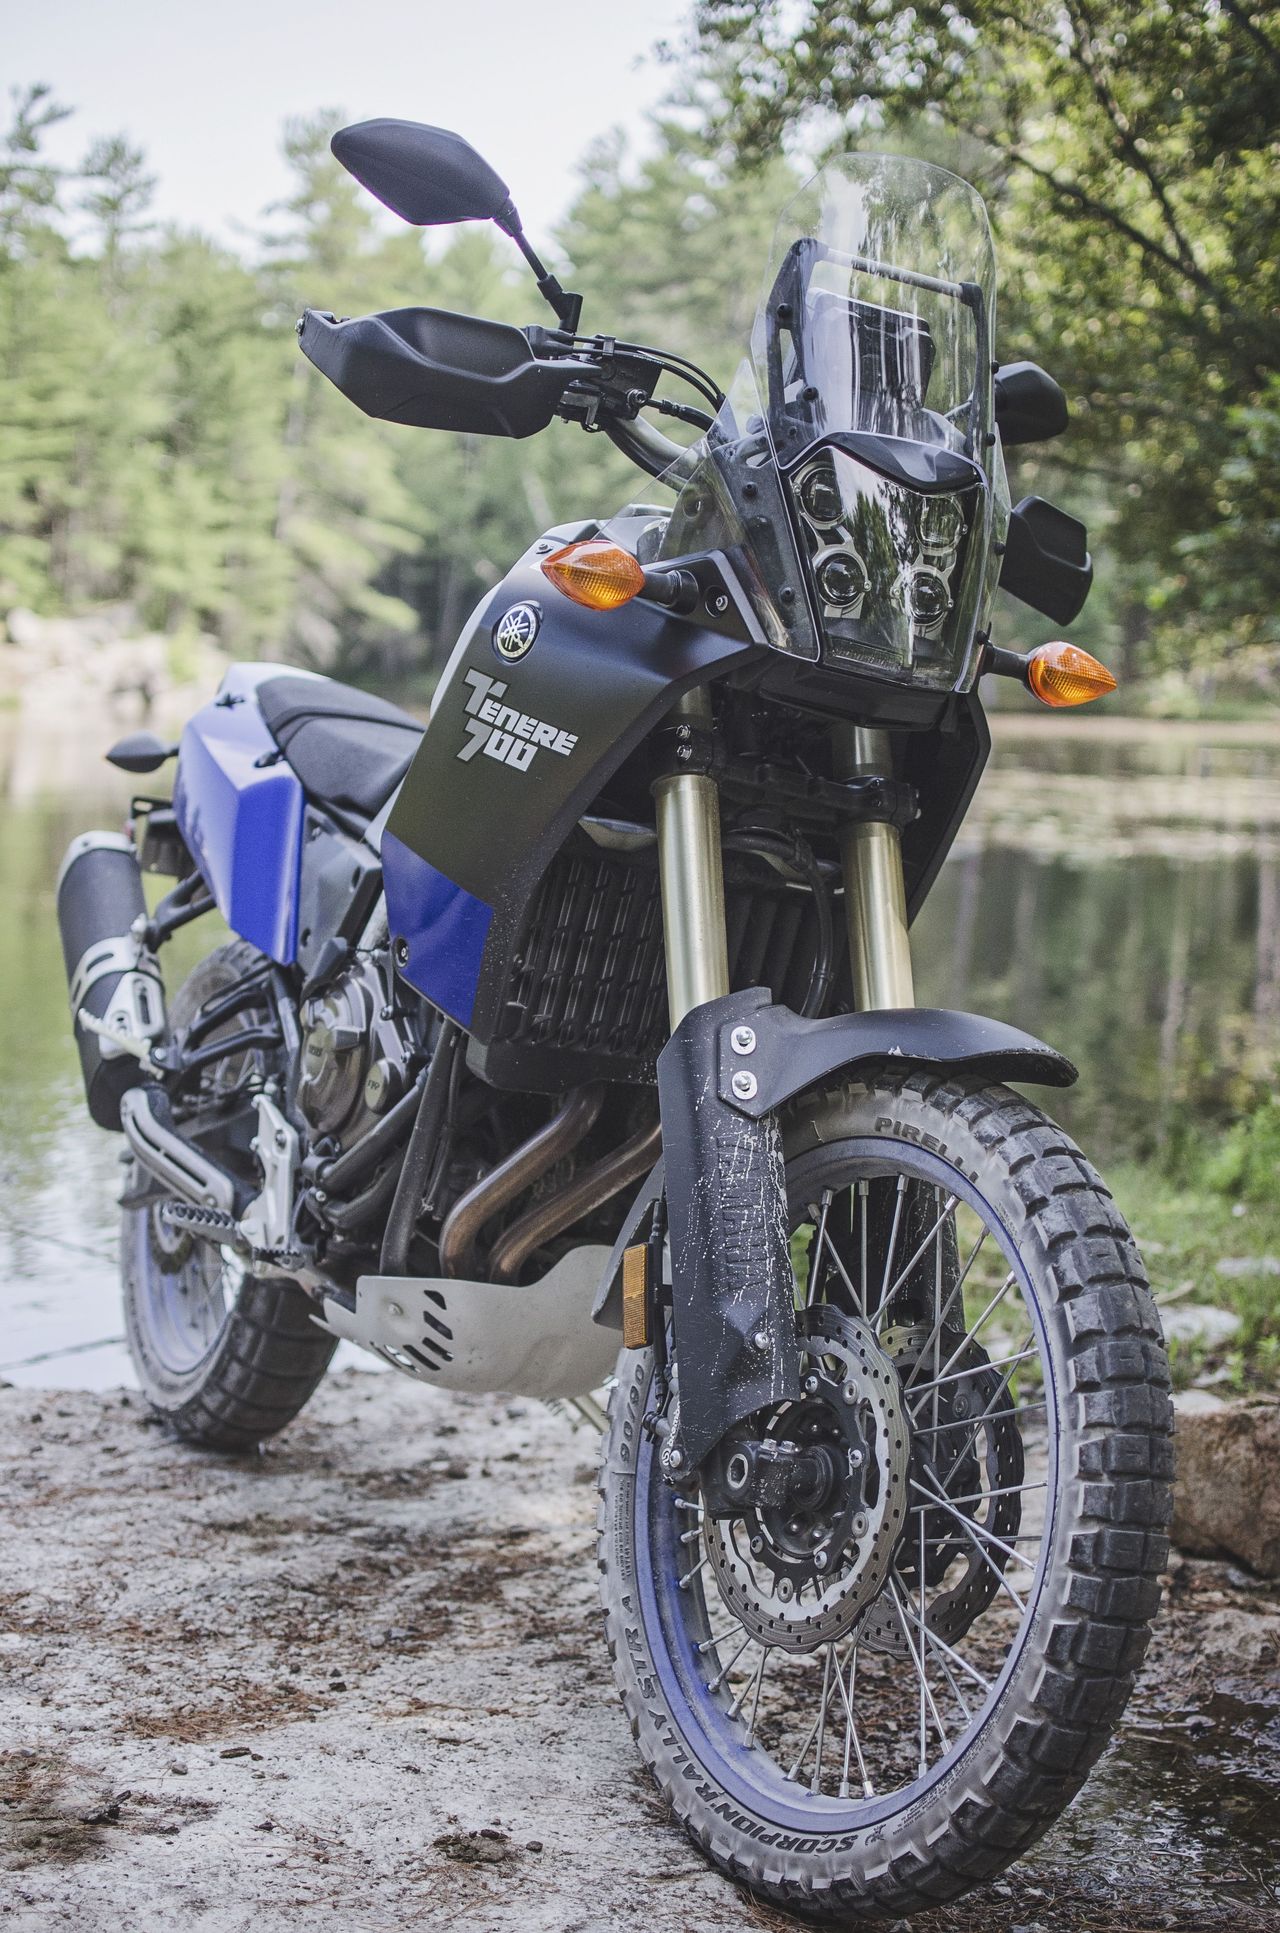 This bike will take you places well off the beaten path!